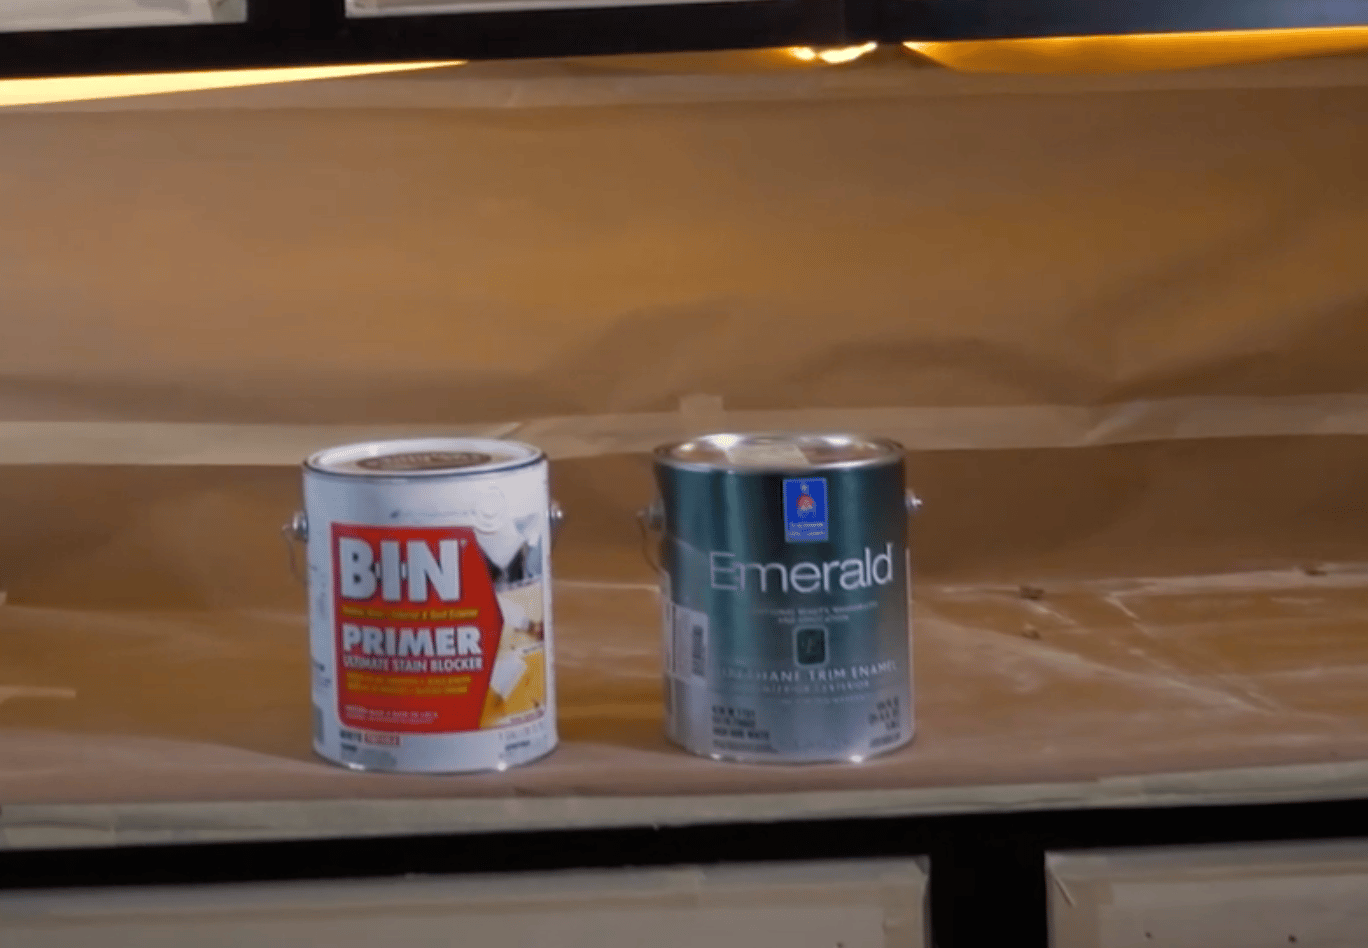 Image of bin shellac primer can next to Sherwin Williams Emerald Urethane paint